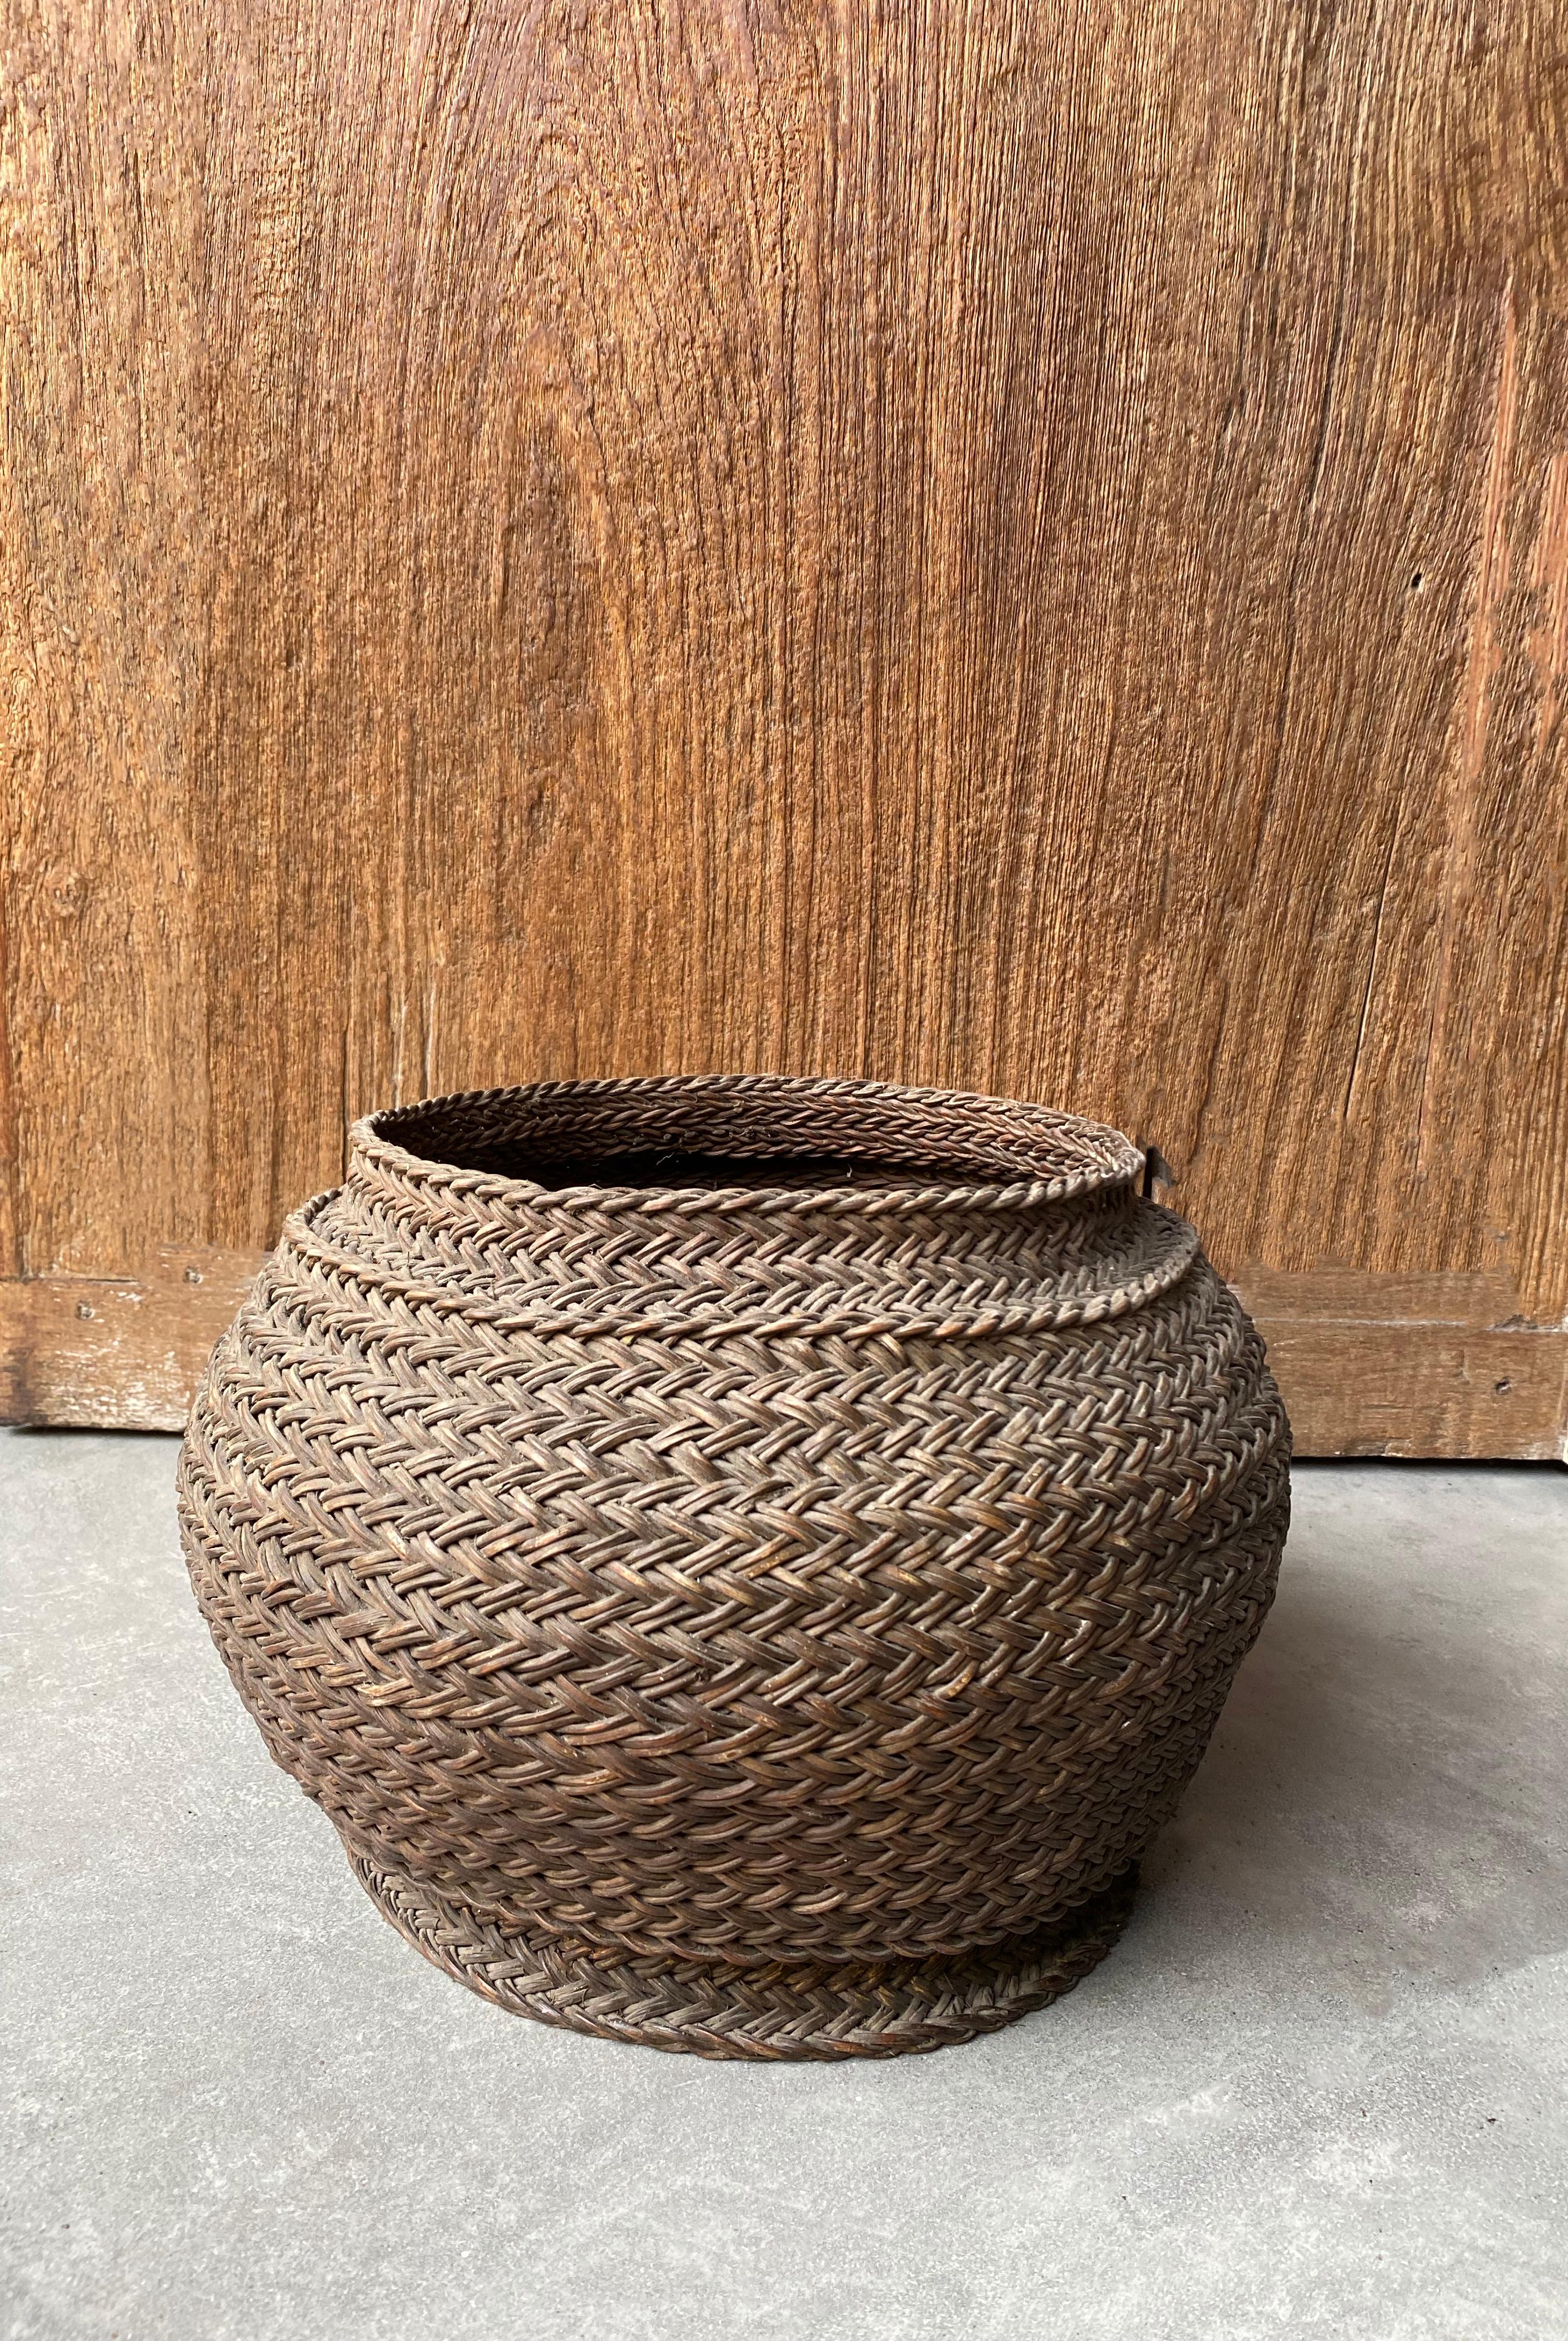 This mid-20th century hand-woven basket originates from Toraja, Sulawesi. It was crafted using elegantly woven plant fibres.

Measures: Height 22cm x diameter 22cm.